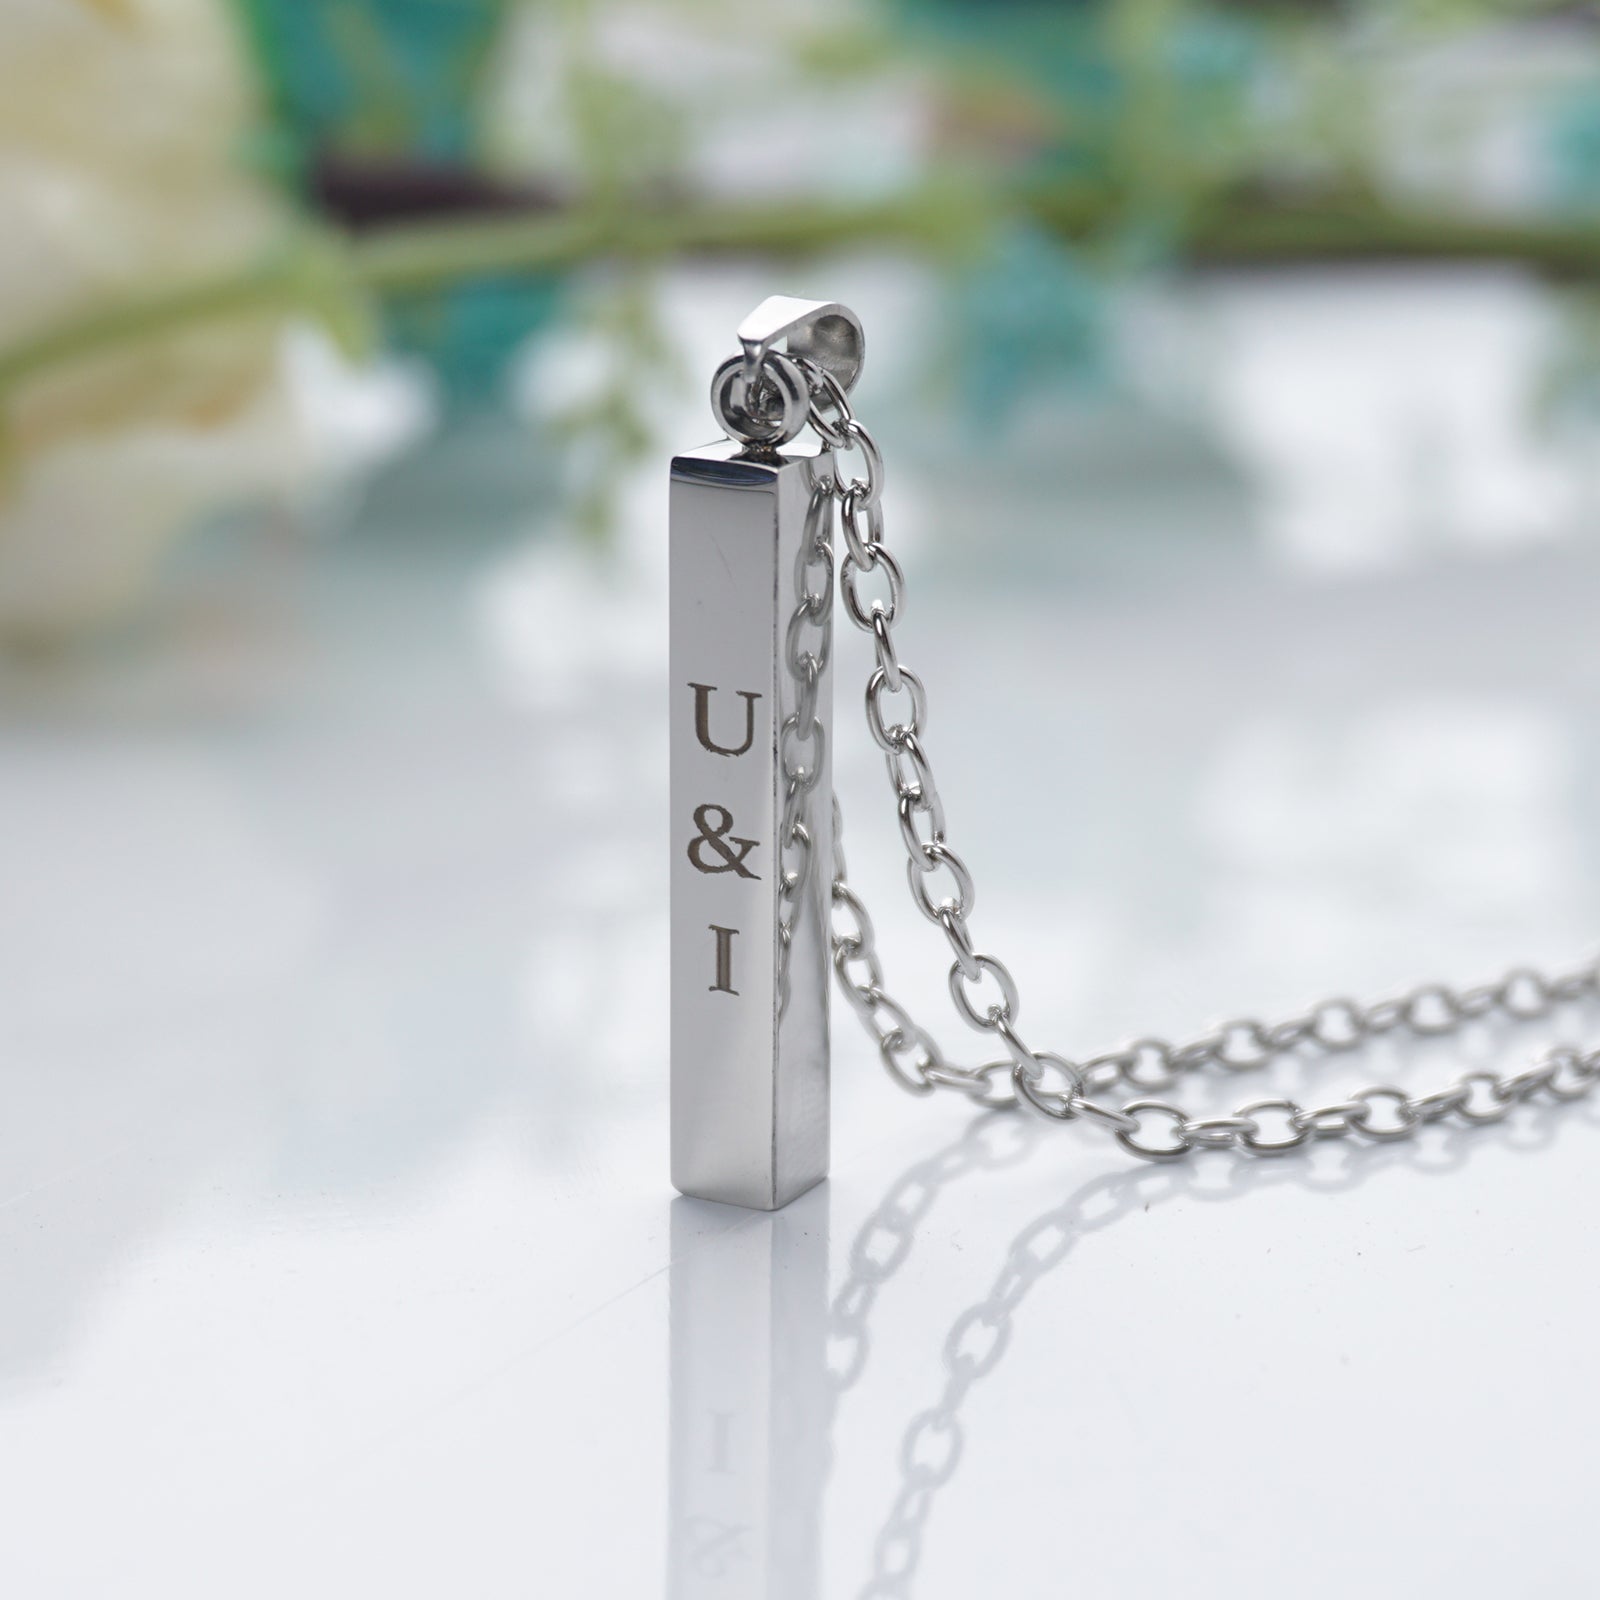 Personalized Engraved Bar Necklace